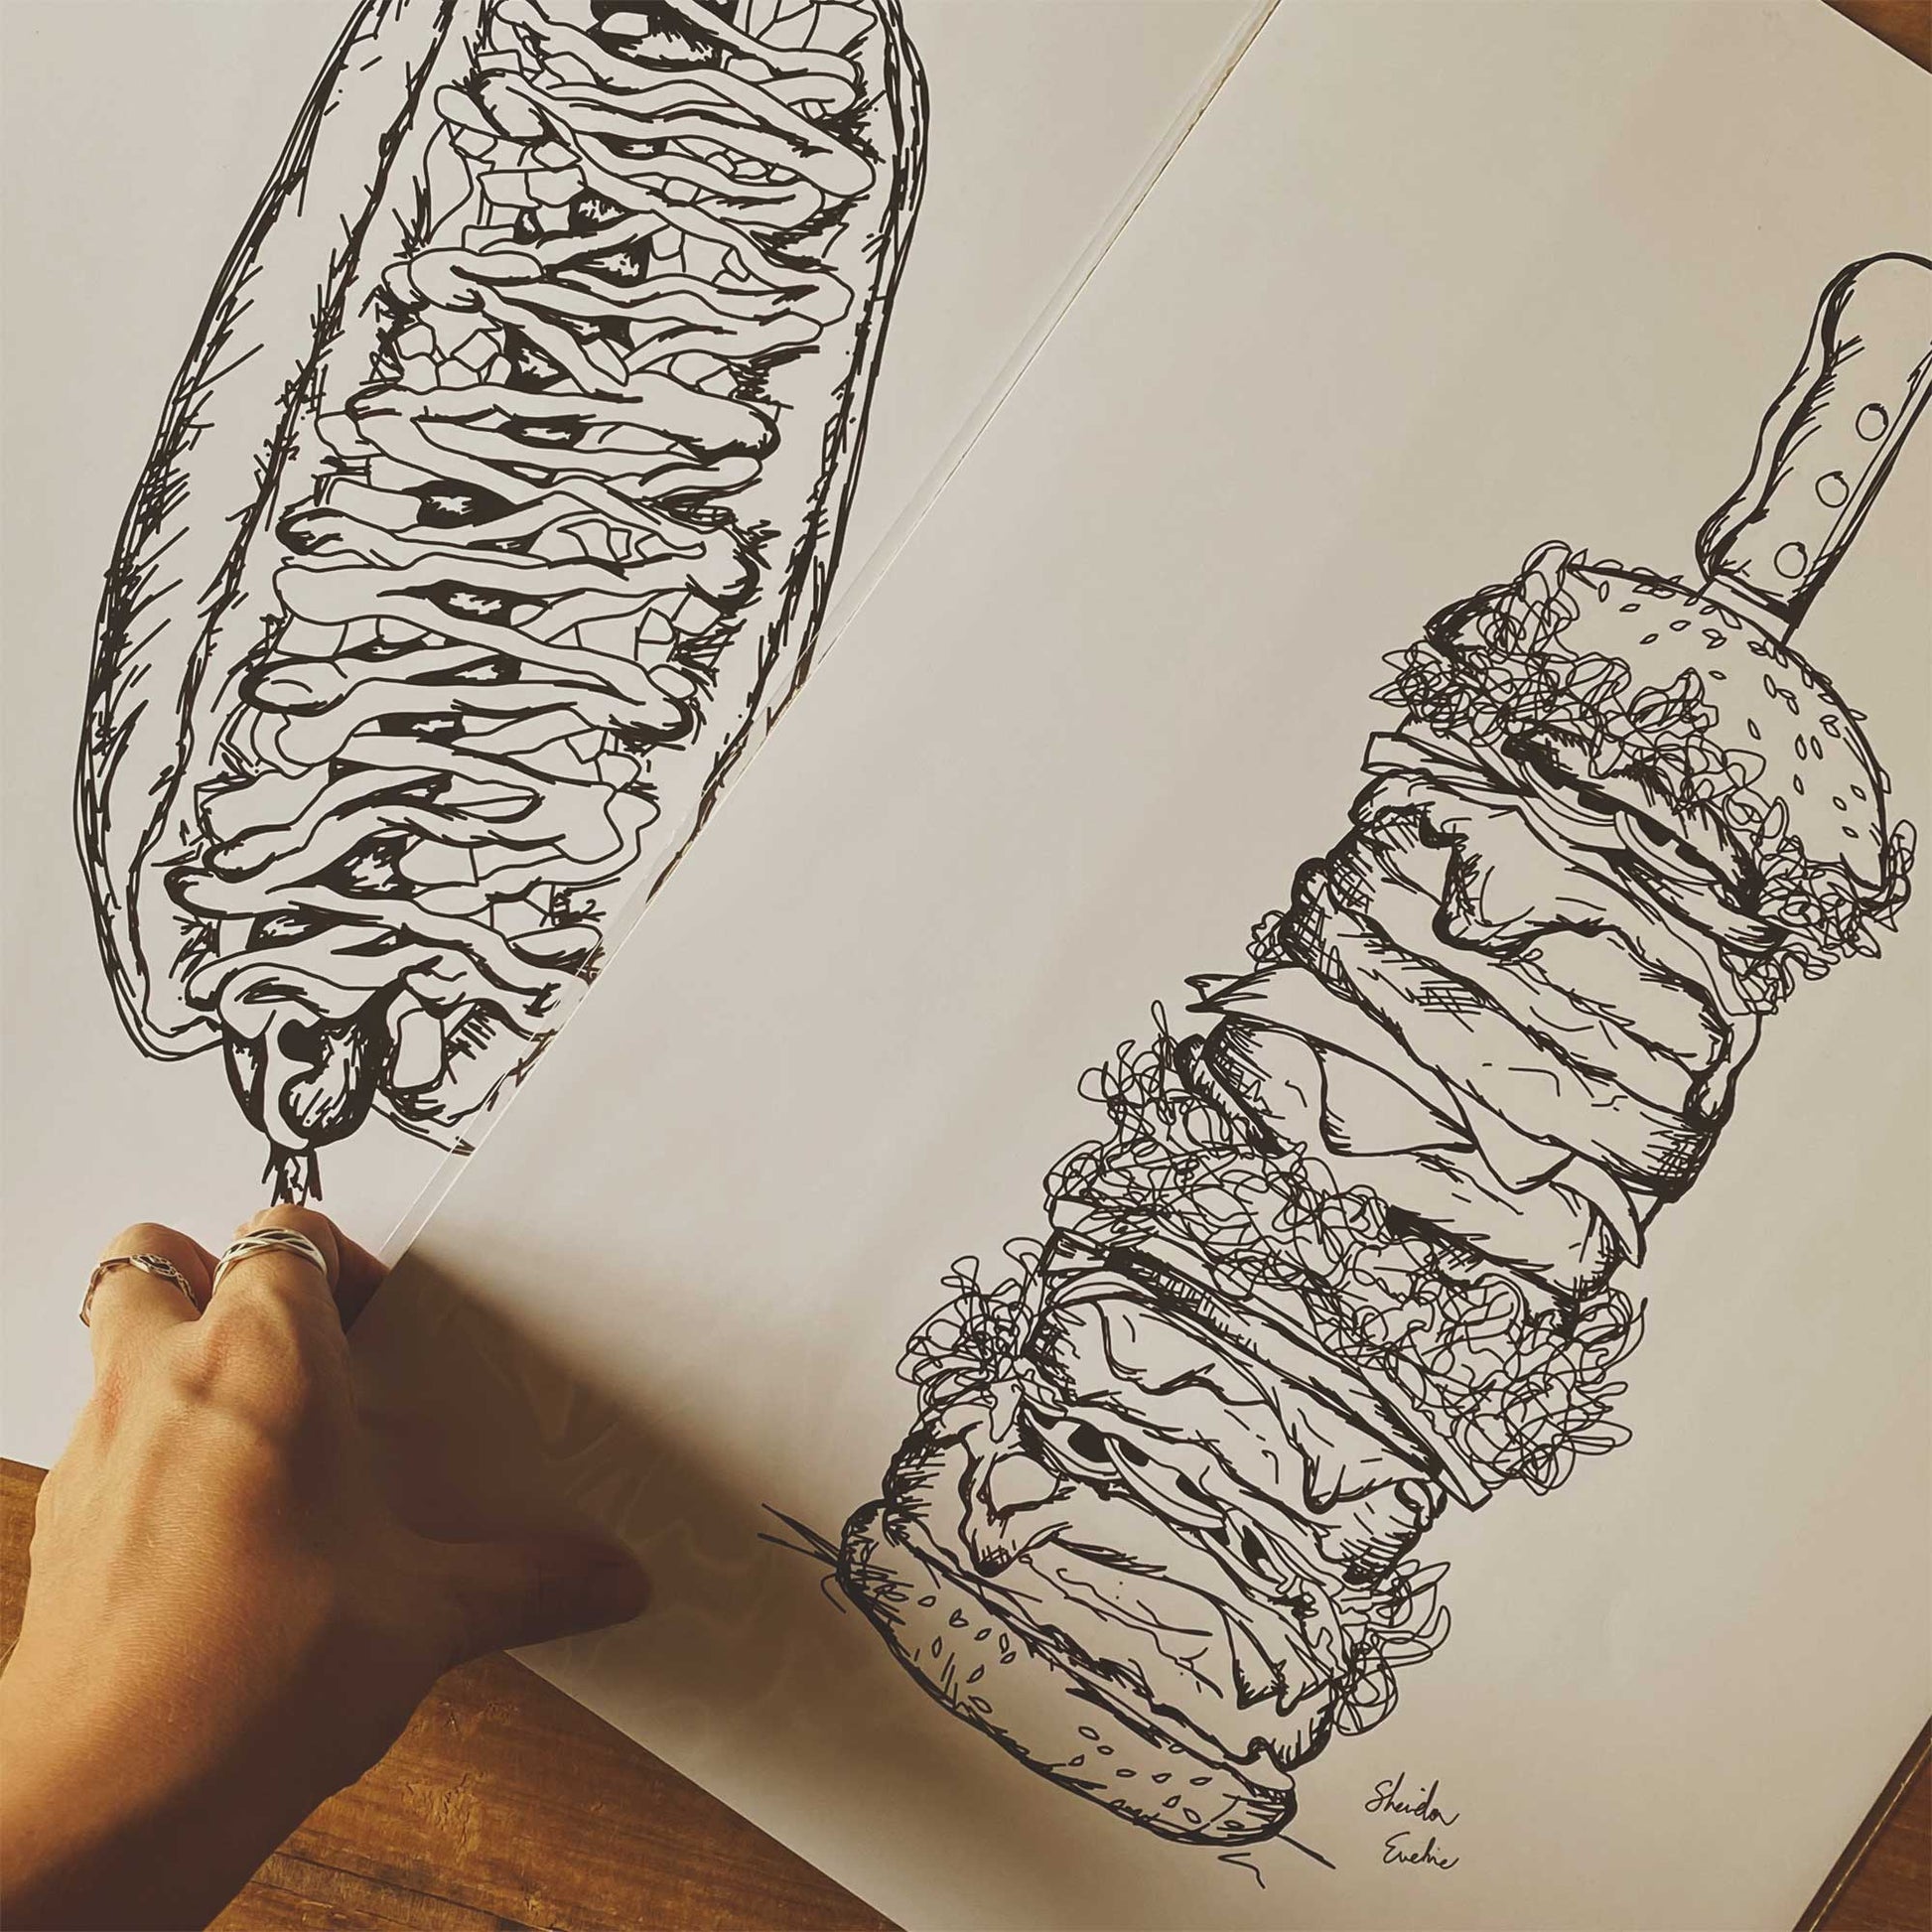 The Ultimate Burger Tower - Art Print by Brisbane Illustrator Sheridan Eveline - Available In A5, A4 & A3